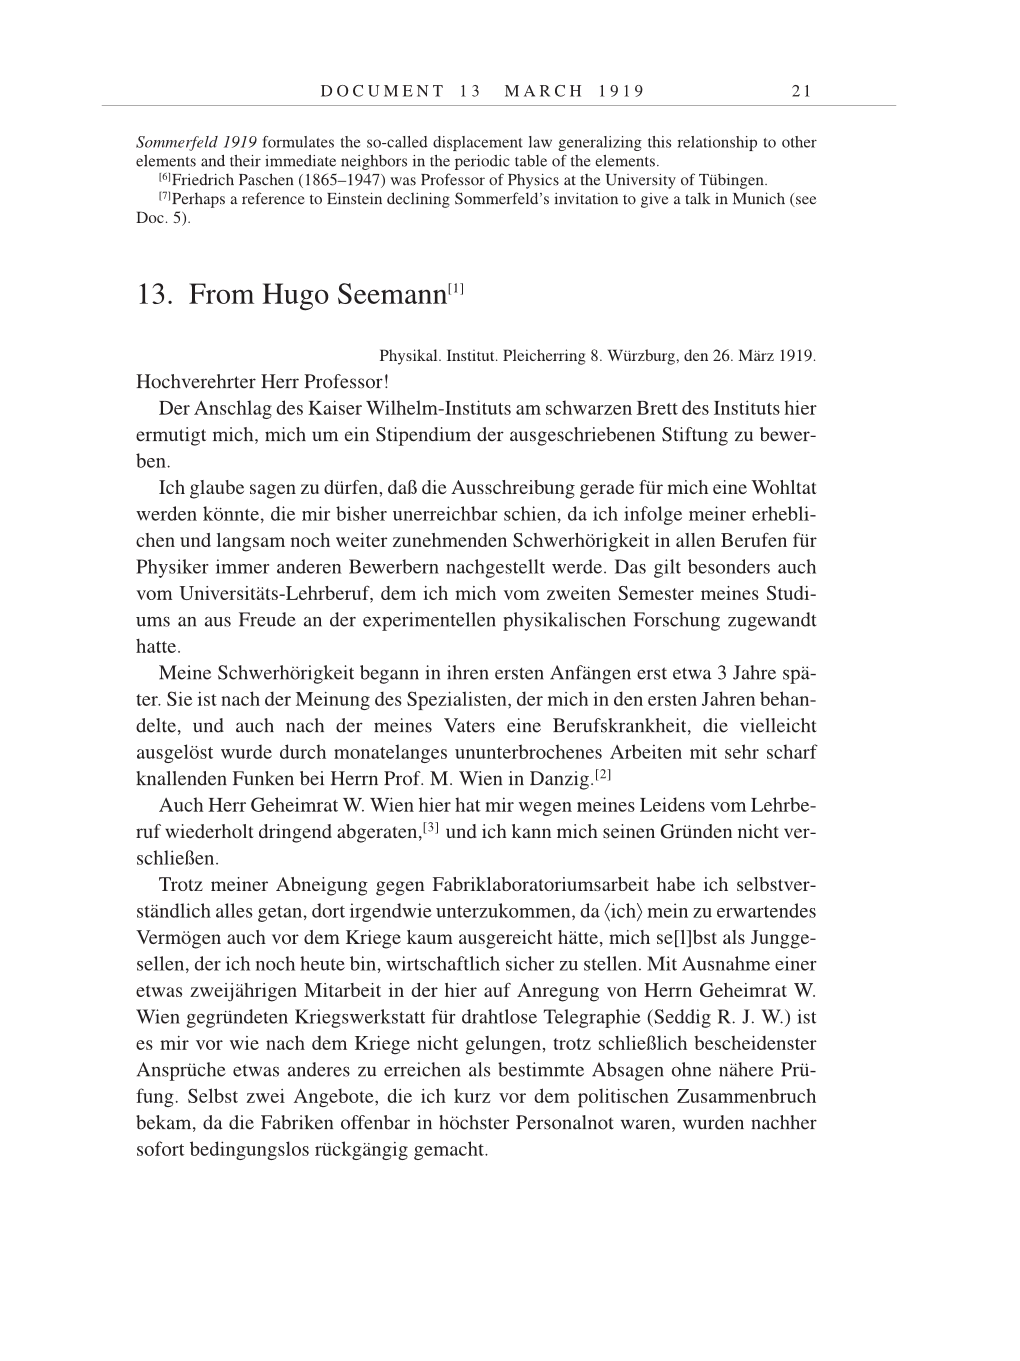 Volume 9: The Berlin Years: Correspondence January 1919-April 1920 page 21